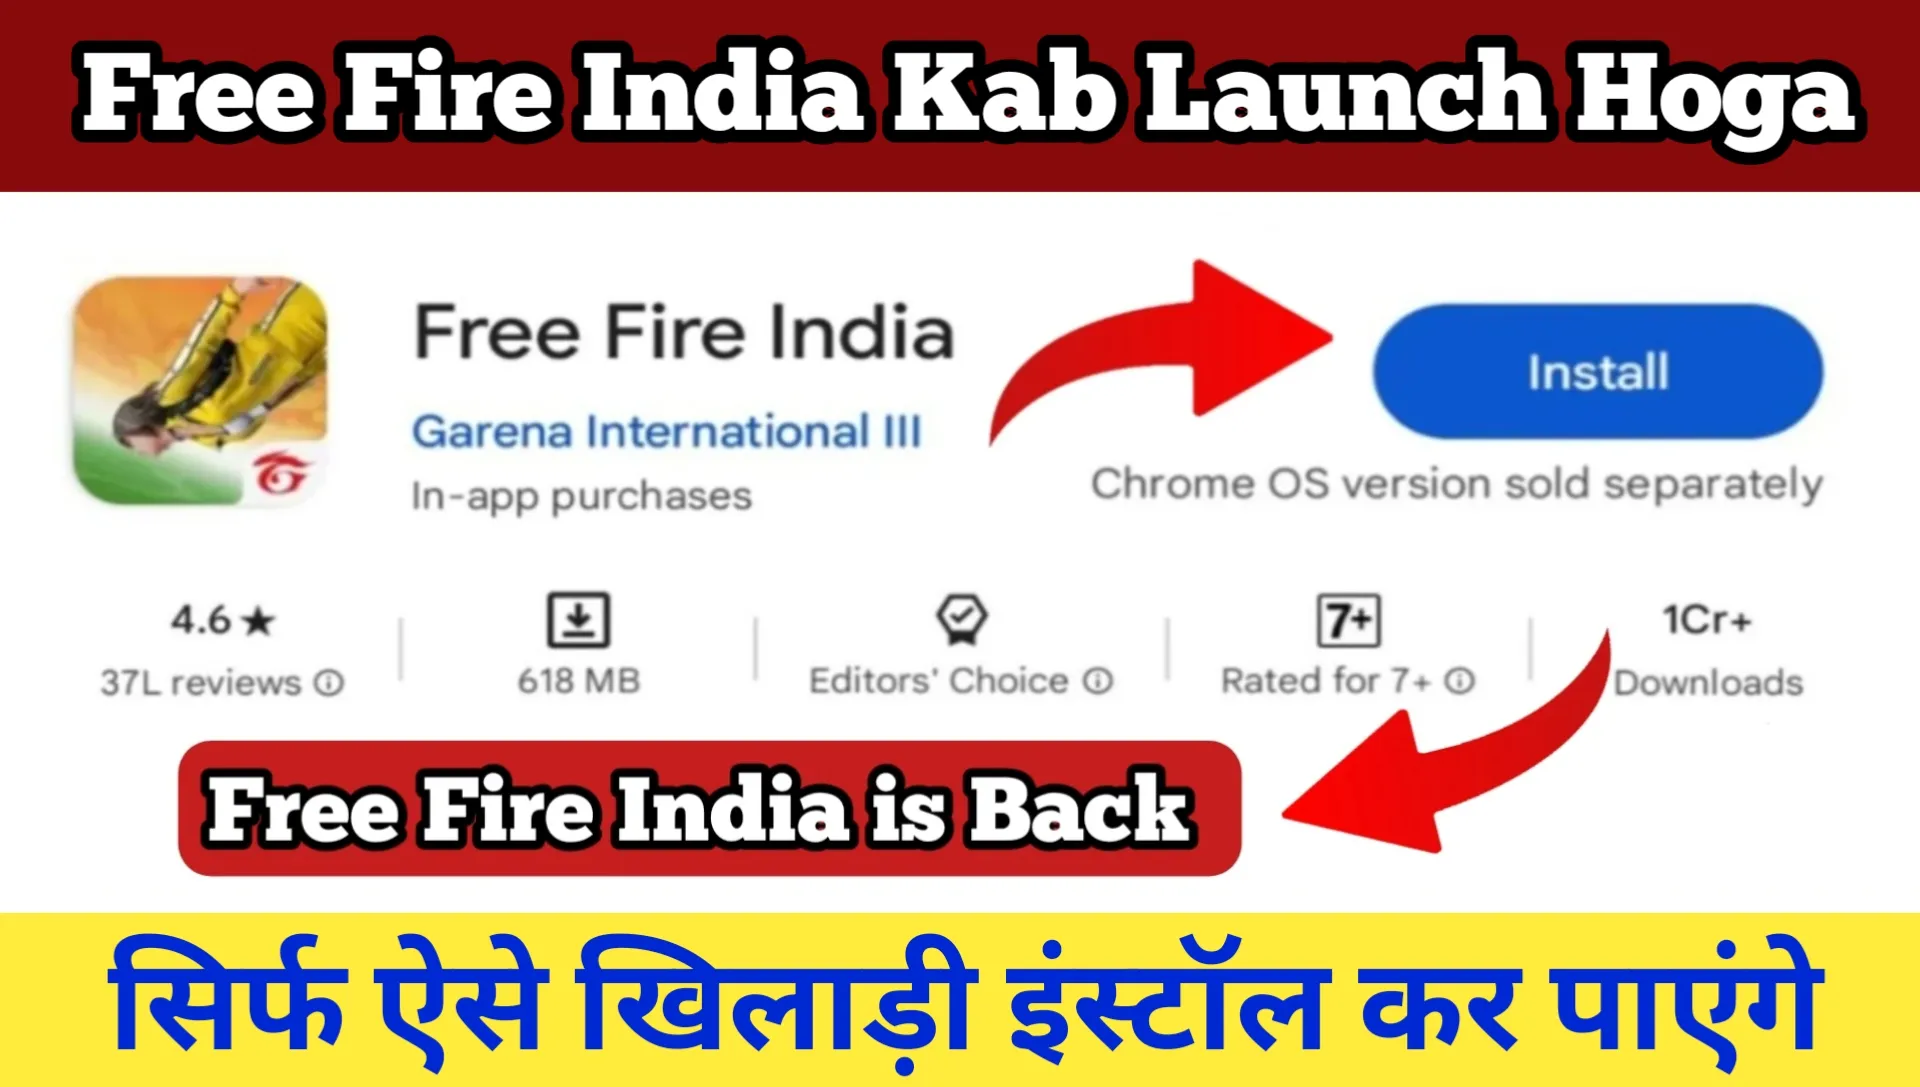 Free Fire India Kab Launch Hoga